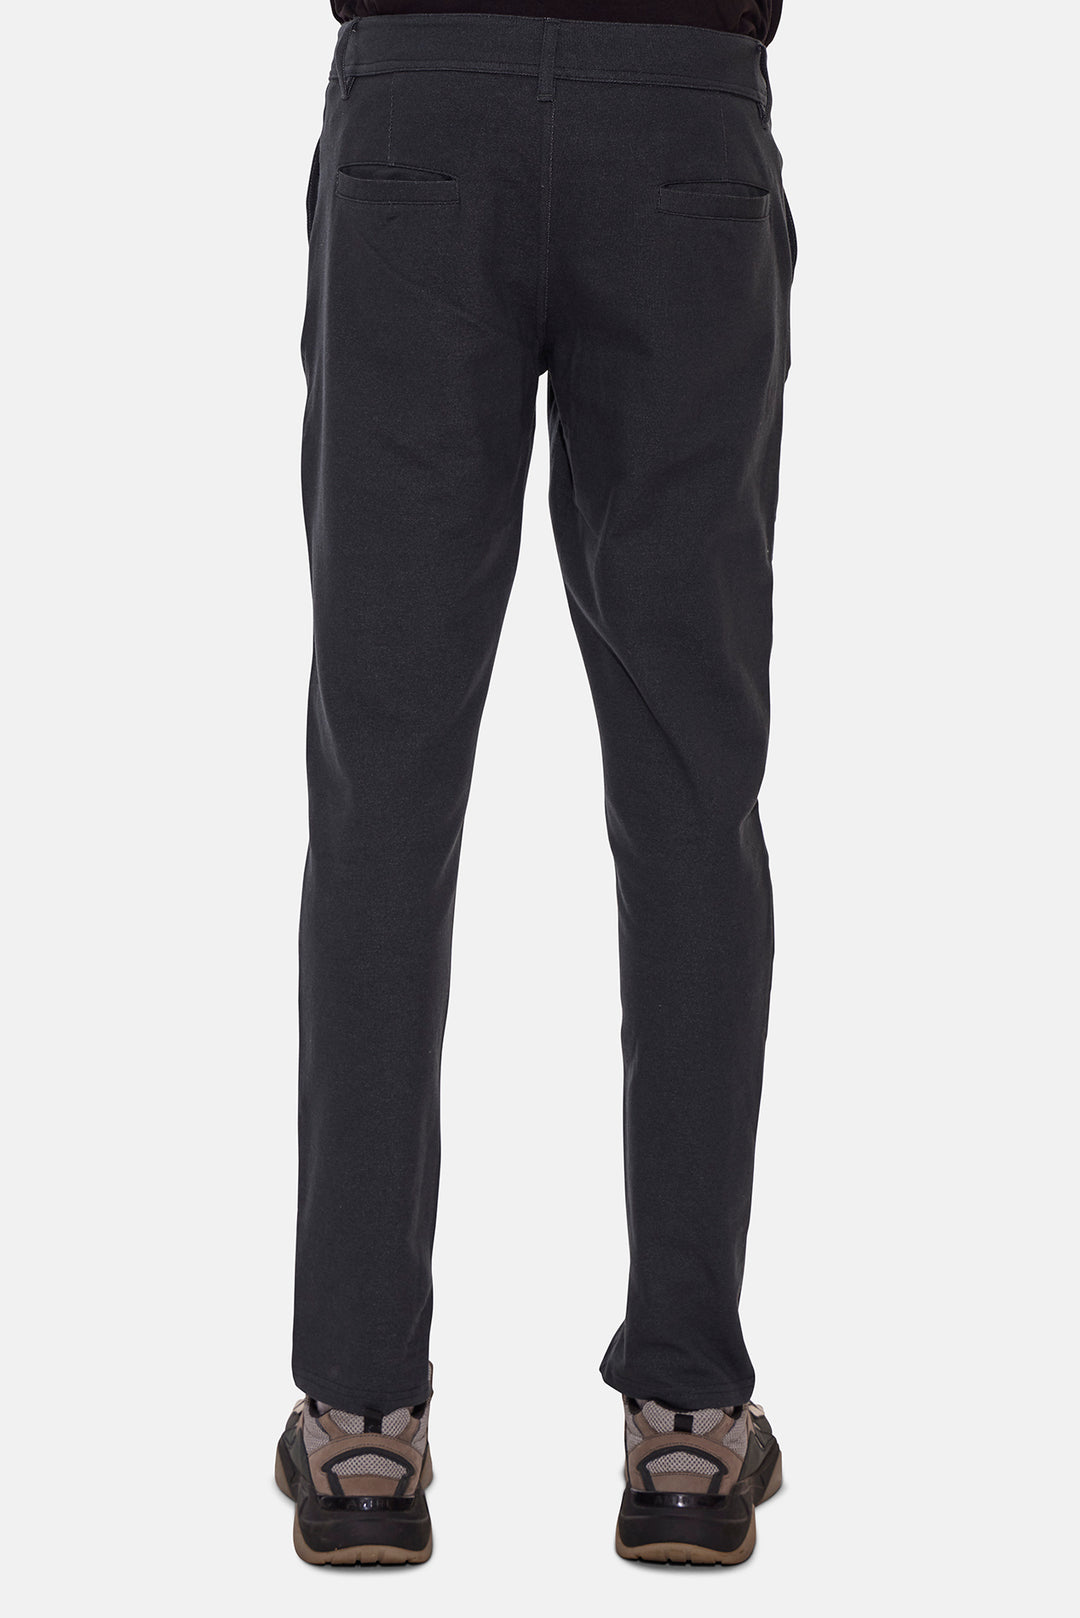 Everyday Pant Charcoal